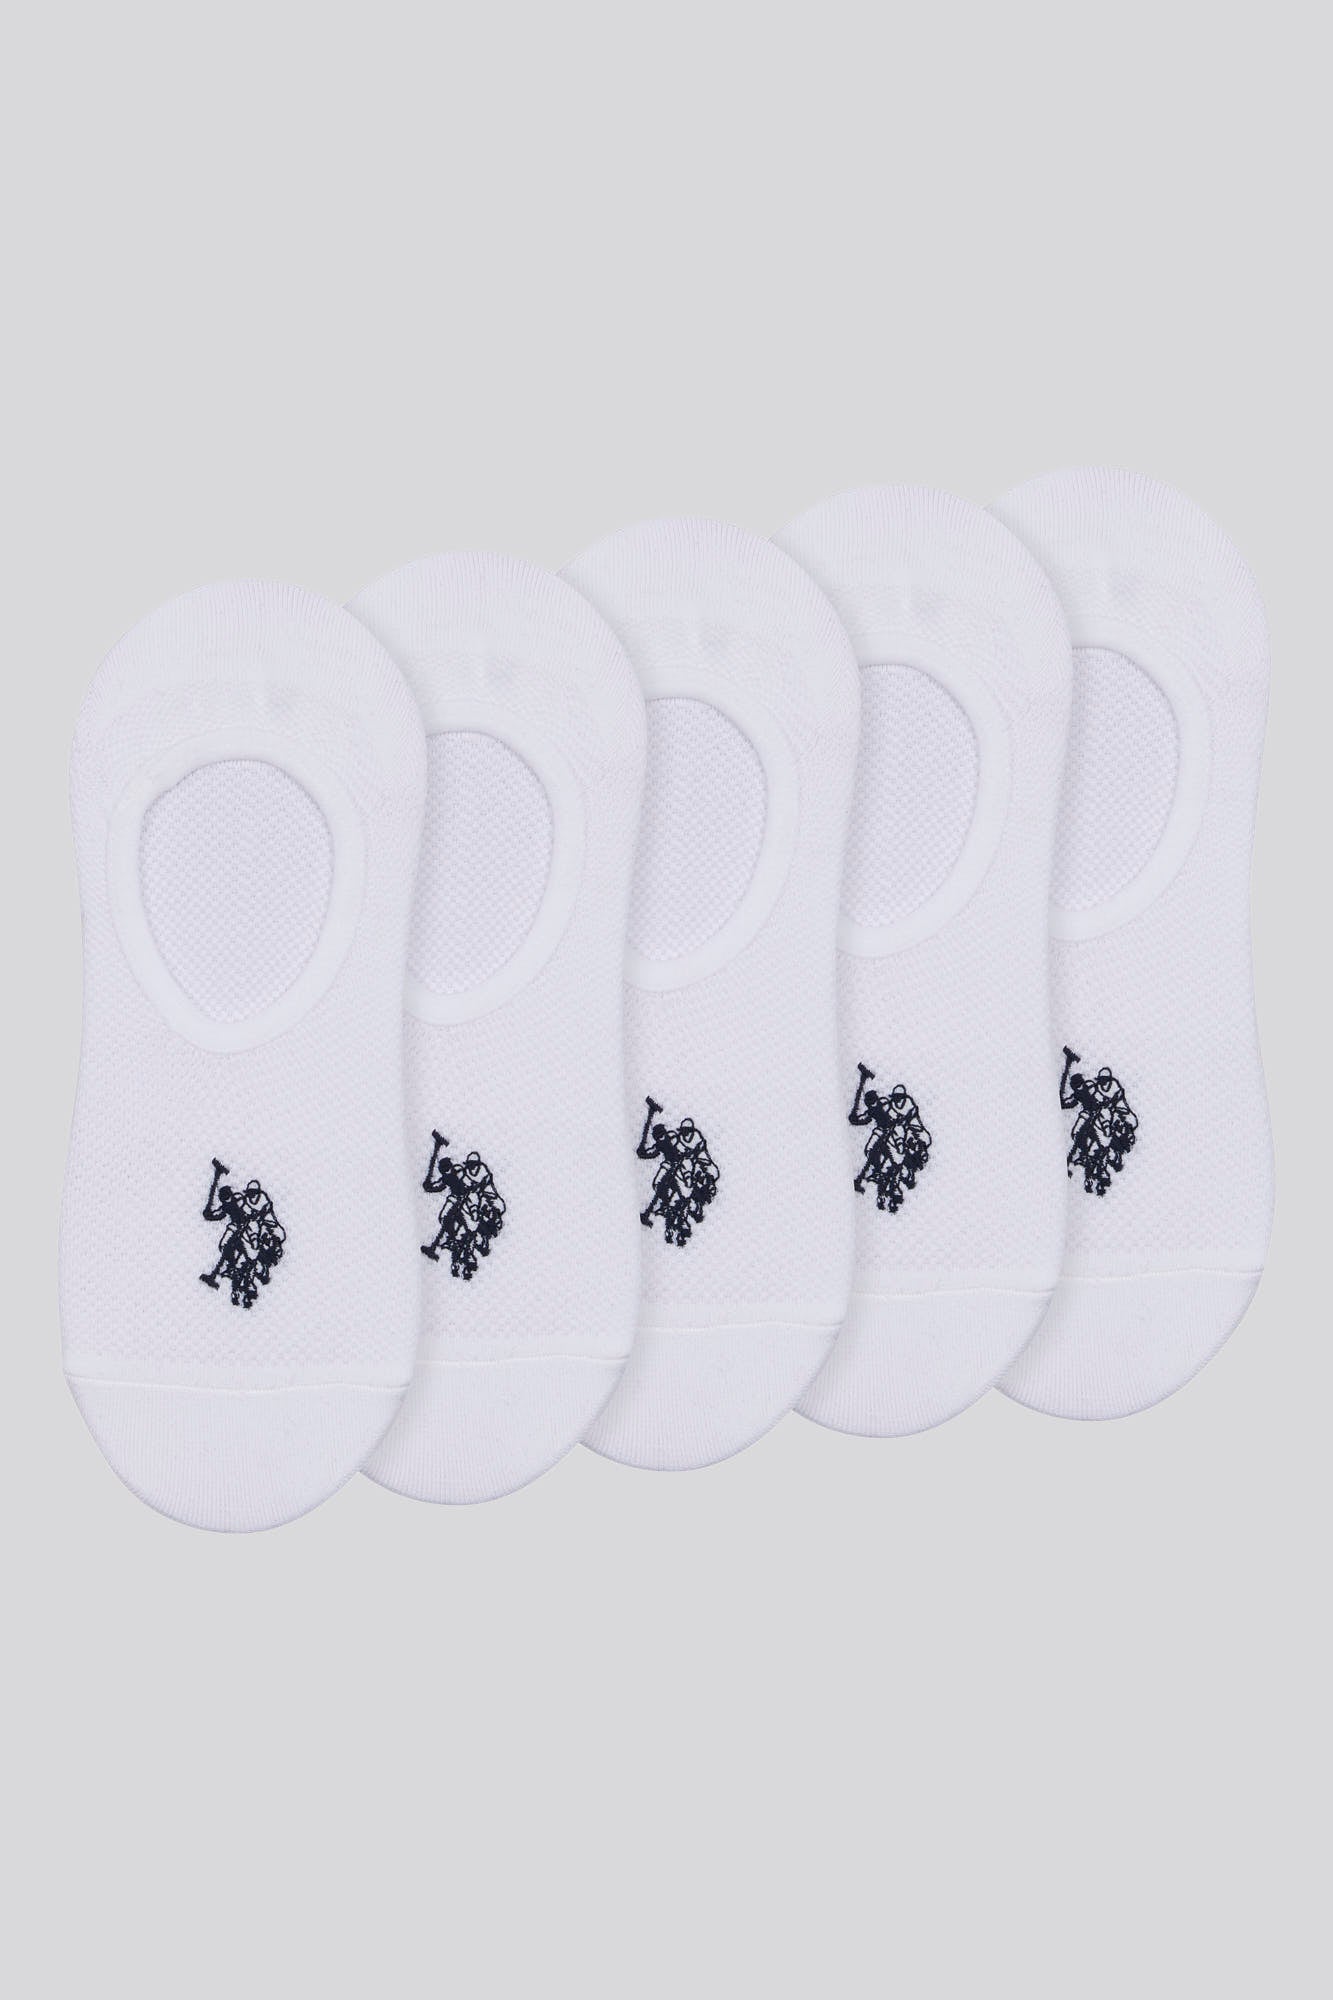 U.S. Polo Assn. Mens 5 Pack Invisible Trainer Socks in Bright